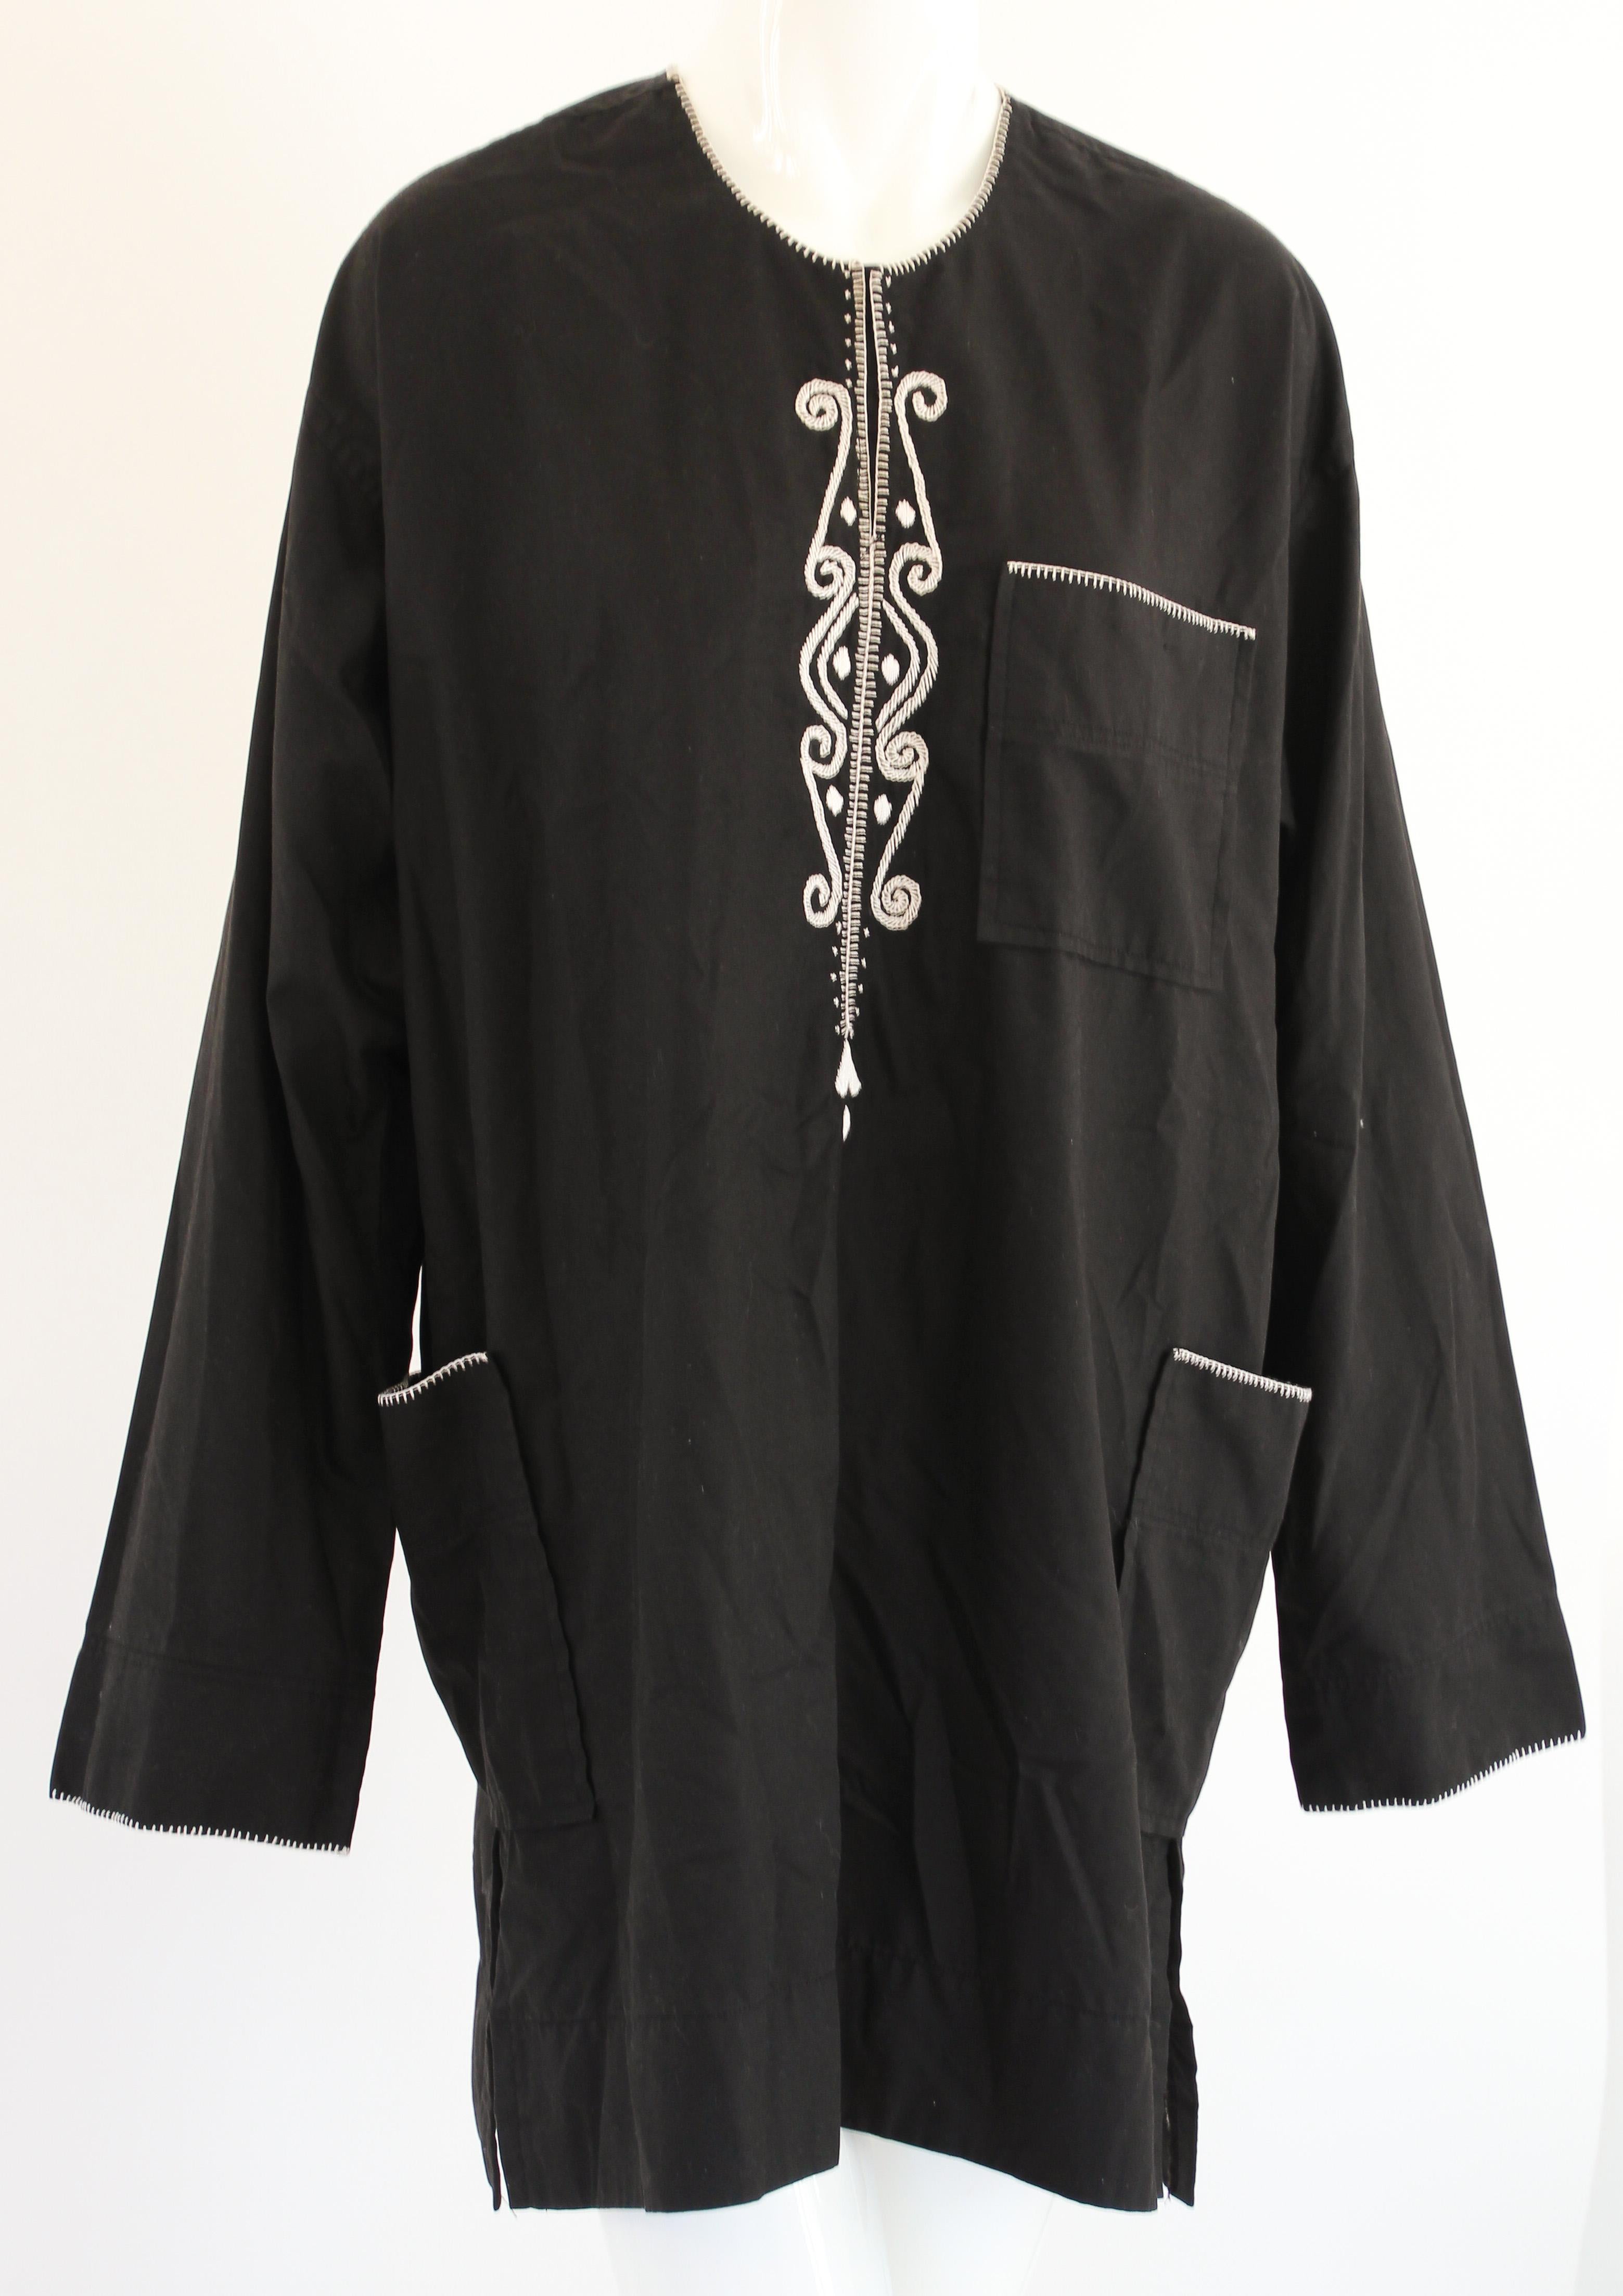 Vintage Traditional African Embroidery Black Shirt.
Black cotton shirt embroidered with white threads.
2 front pockets.
size large to xl.
Dimesions flat.
Across shoulders: 20